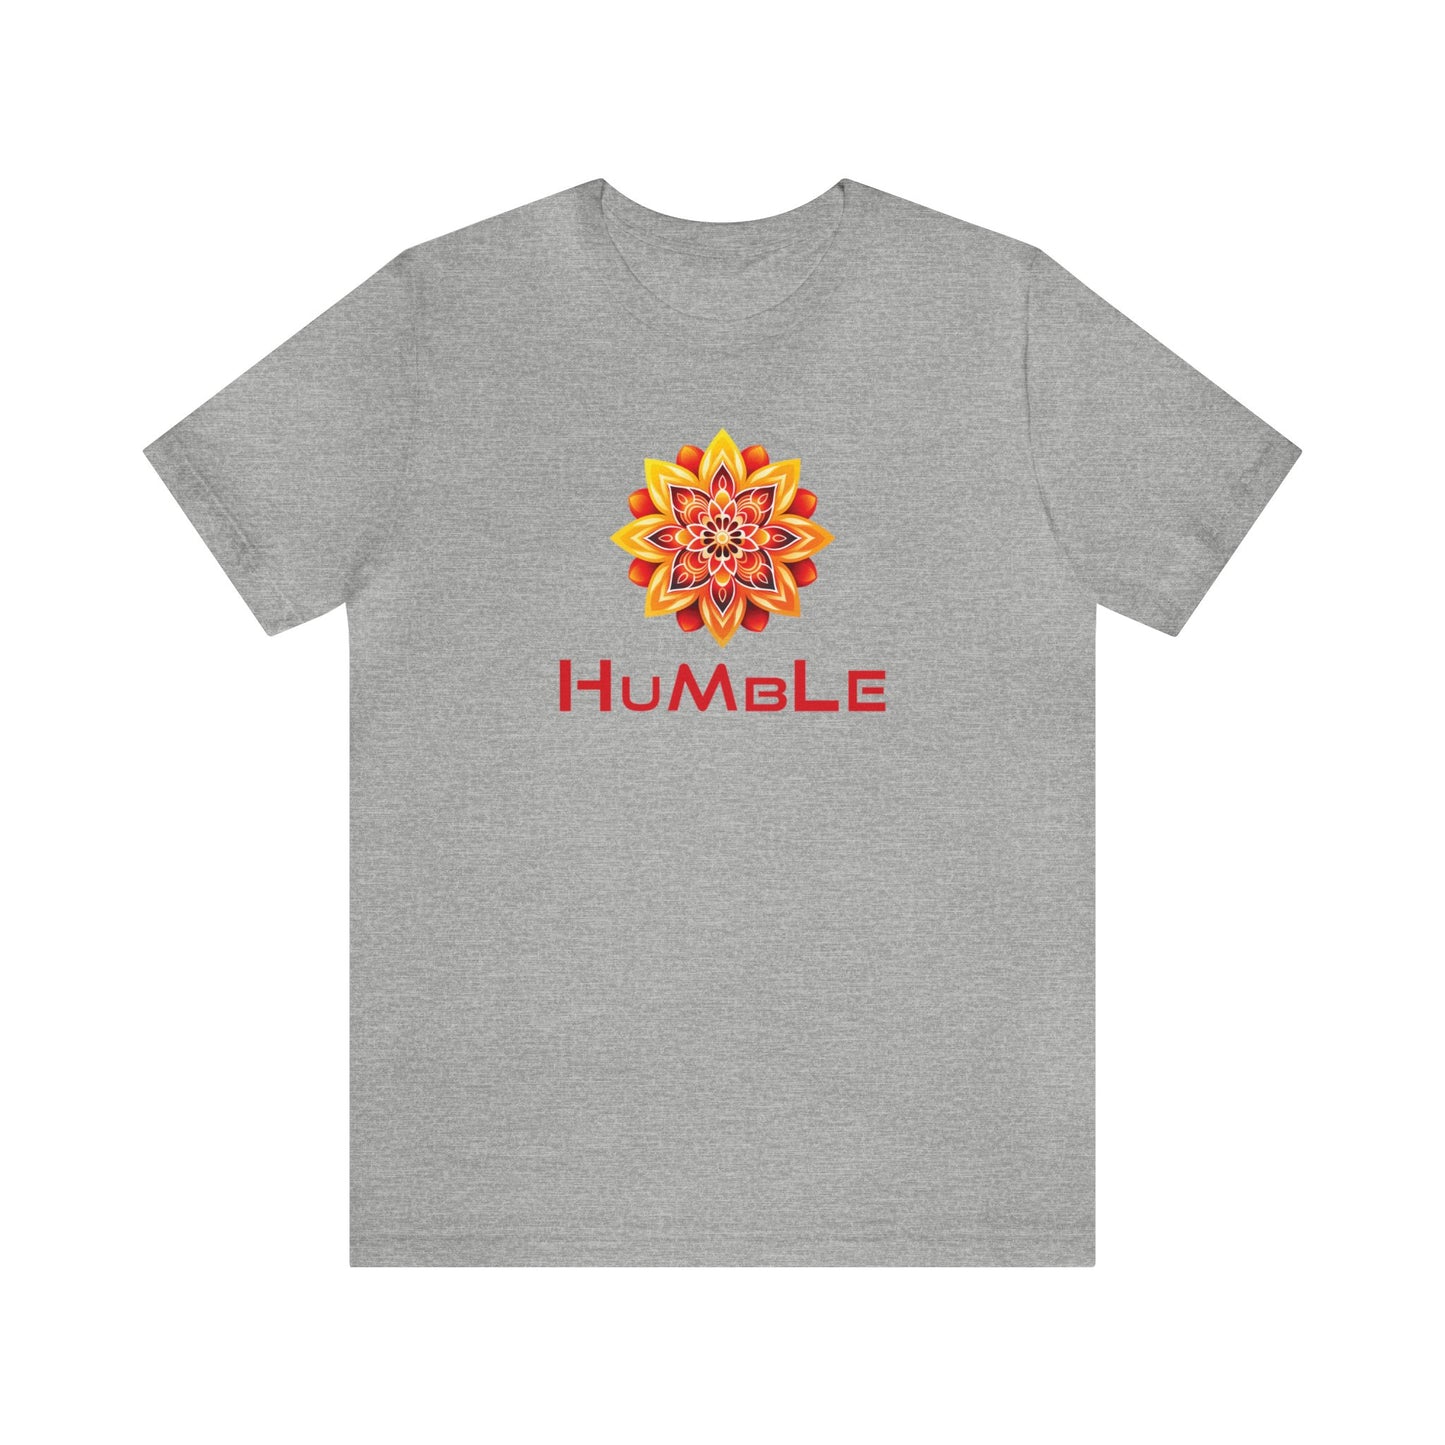 Recovery Tee, Sobriety T shirt, Unisex Tshirt, Humility Graphic Shirt, Spirituality, Recovery Principles, 12 Steps Shirt, Recovery Gift